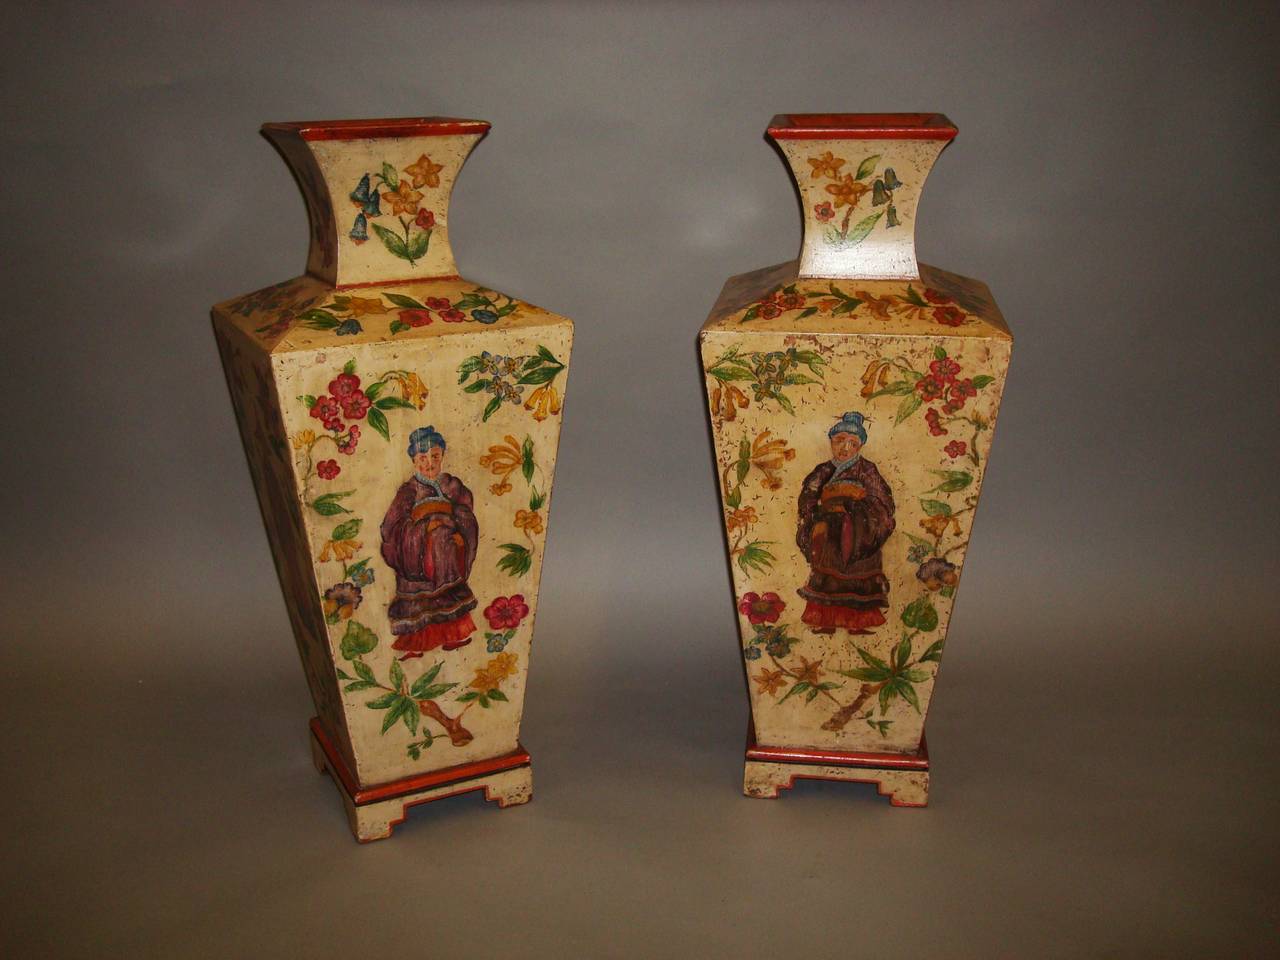 Early 20th century Decorative Pair of Large Painted Pine Vases In Good Condition For Sale In Moreton-in-Marsh, Gloucestershire